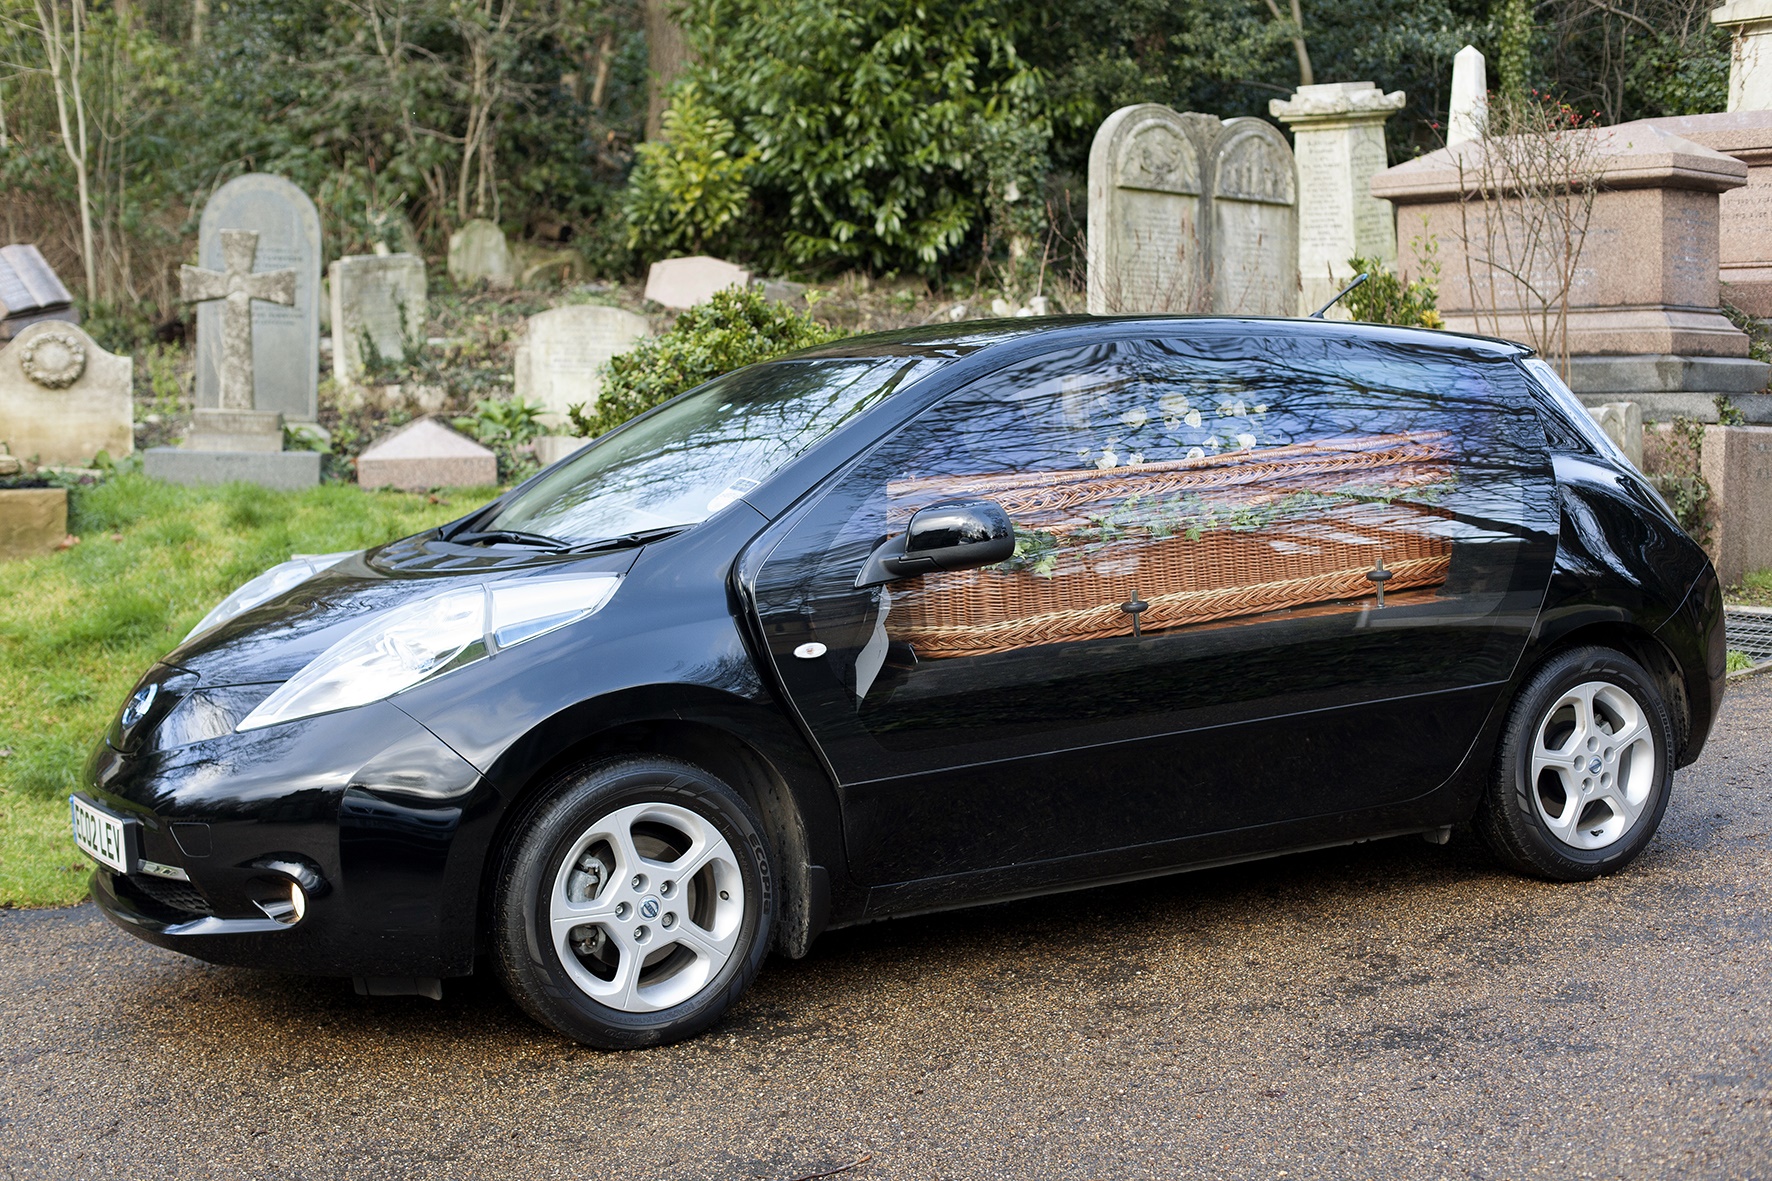 how did the hearse funeral car get its name and what does hearse mean in norman language